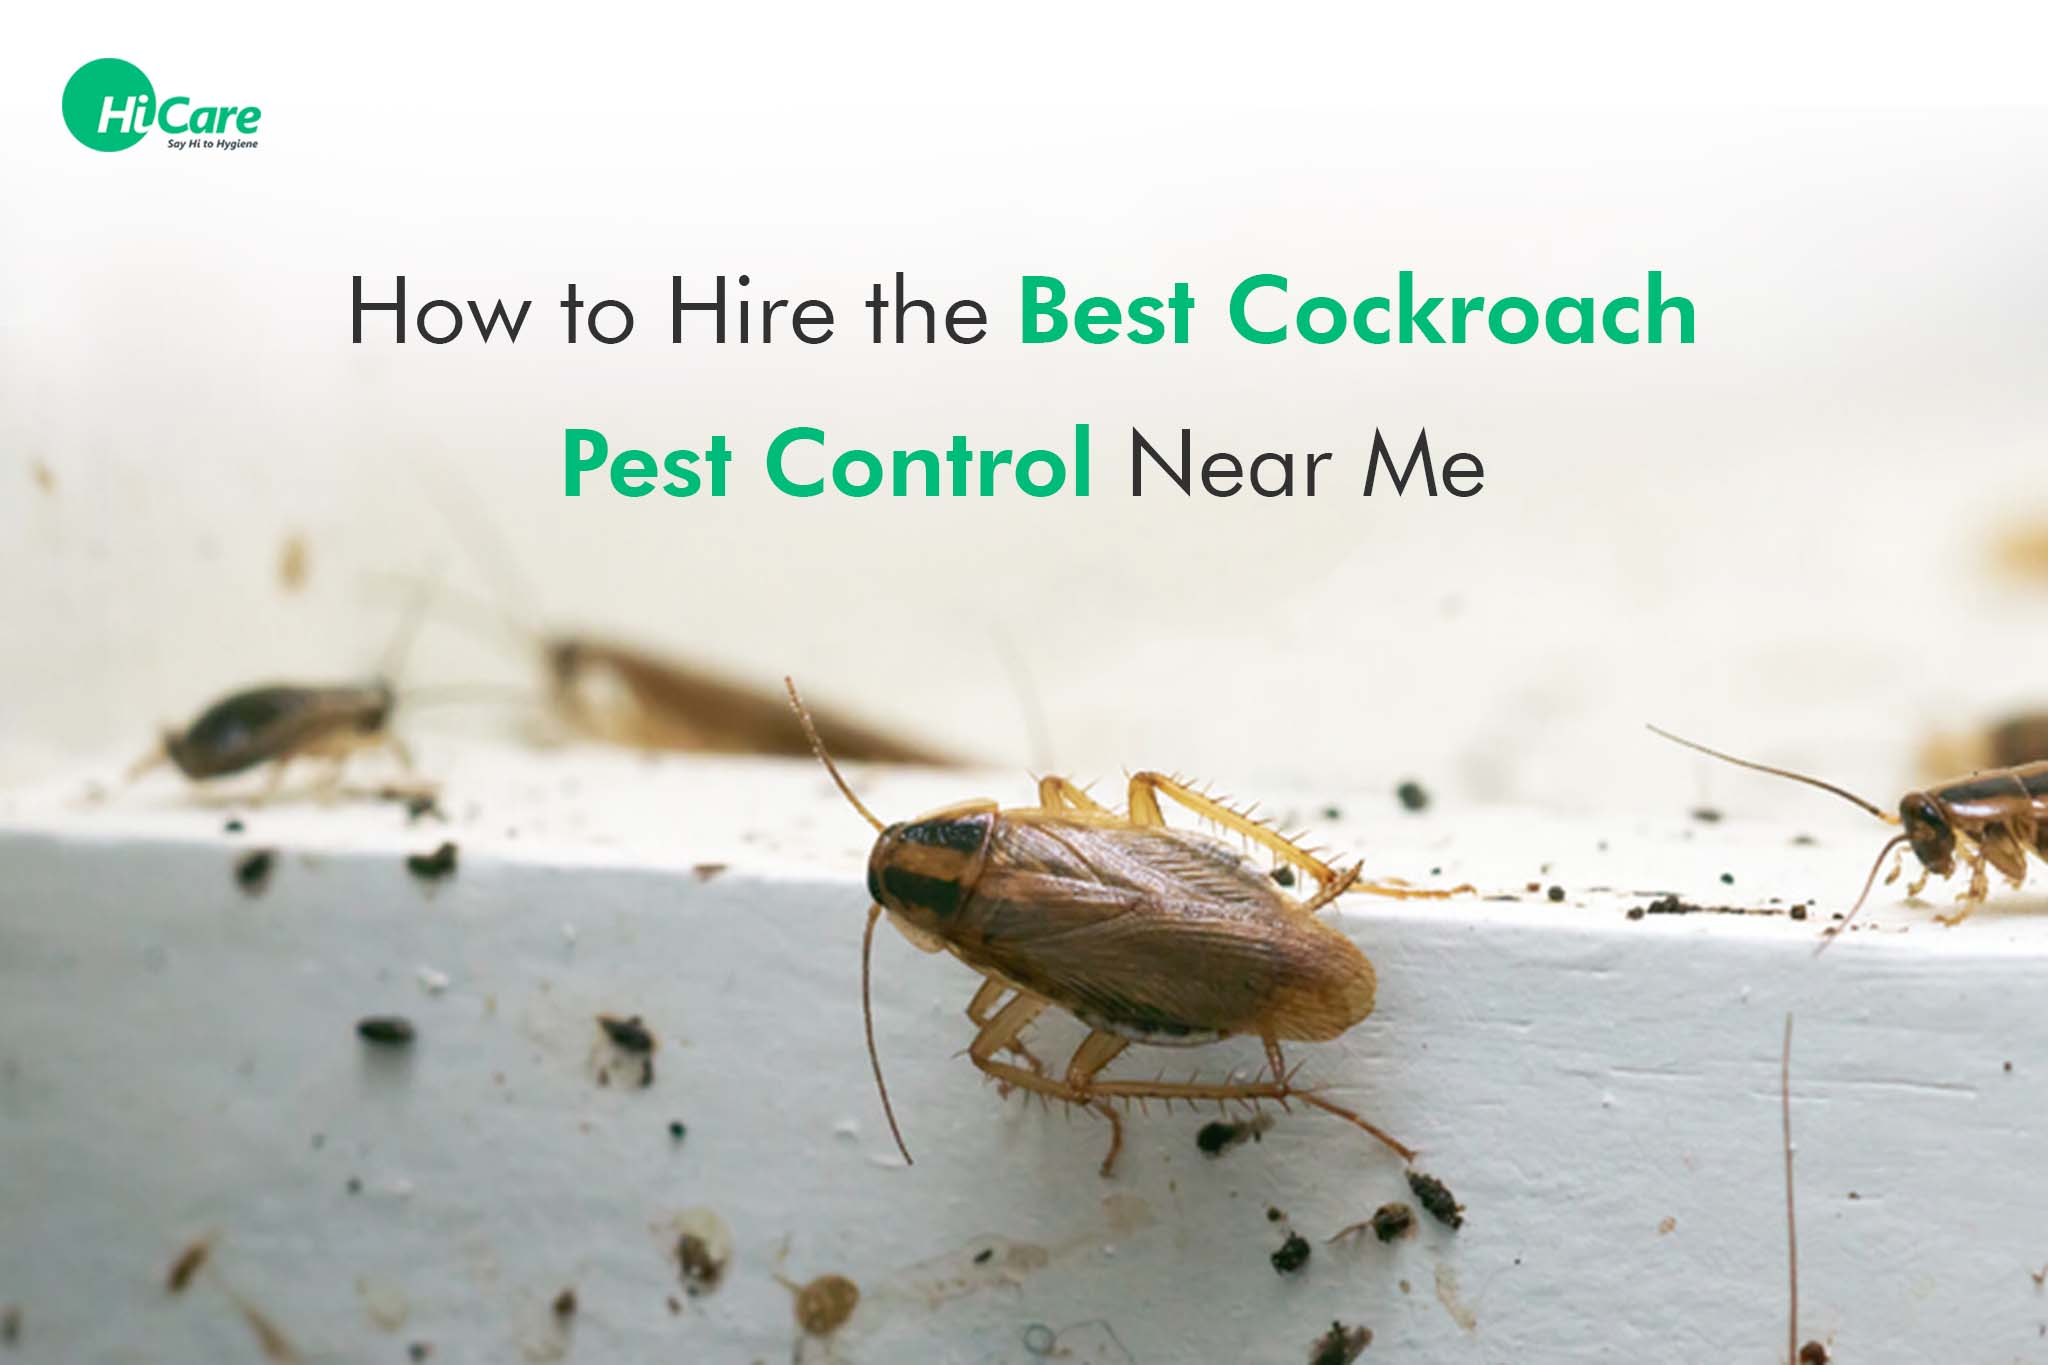 How to Hire the Best Cockroach Pest Control Near Me | HiCare